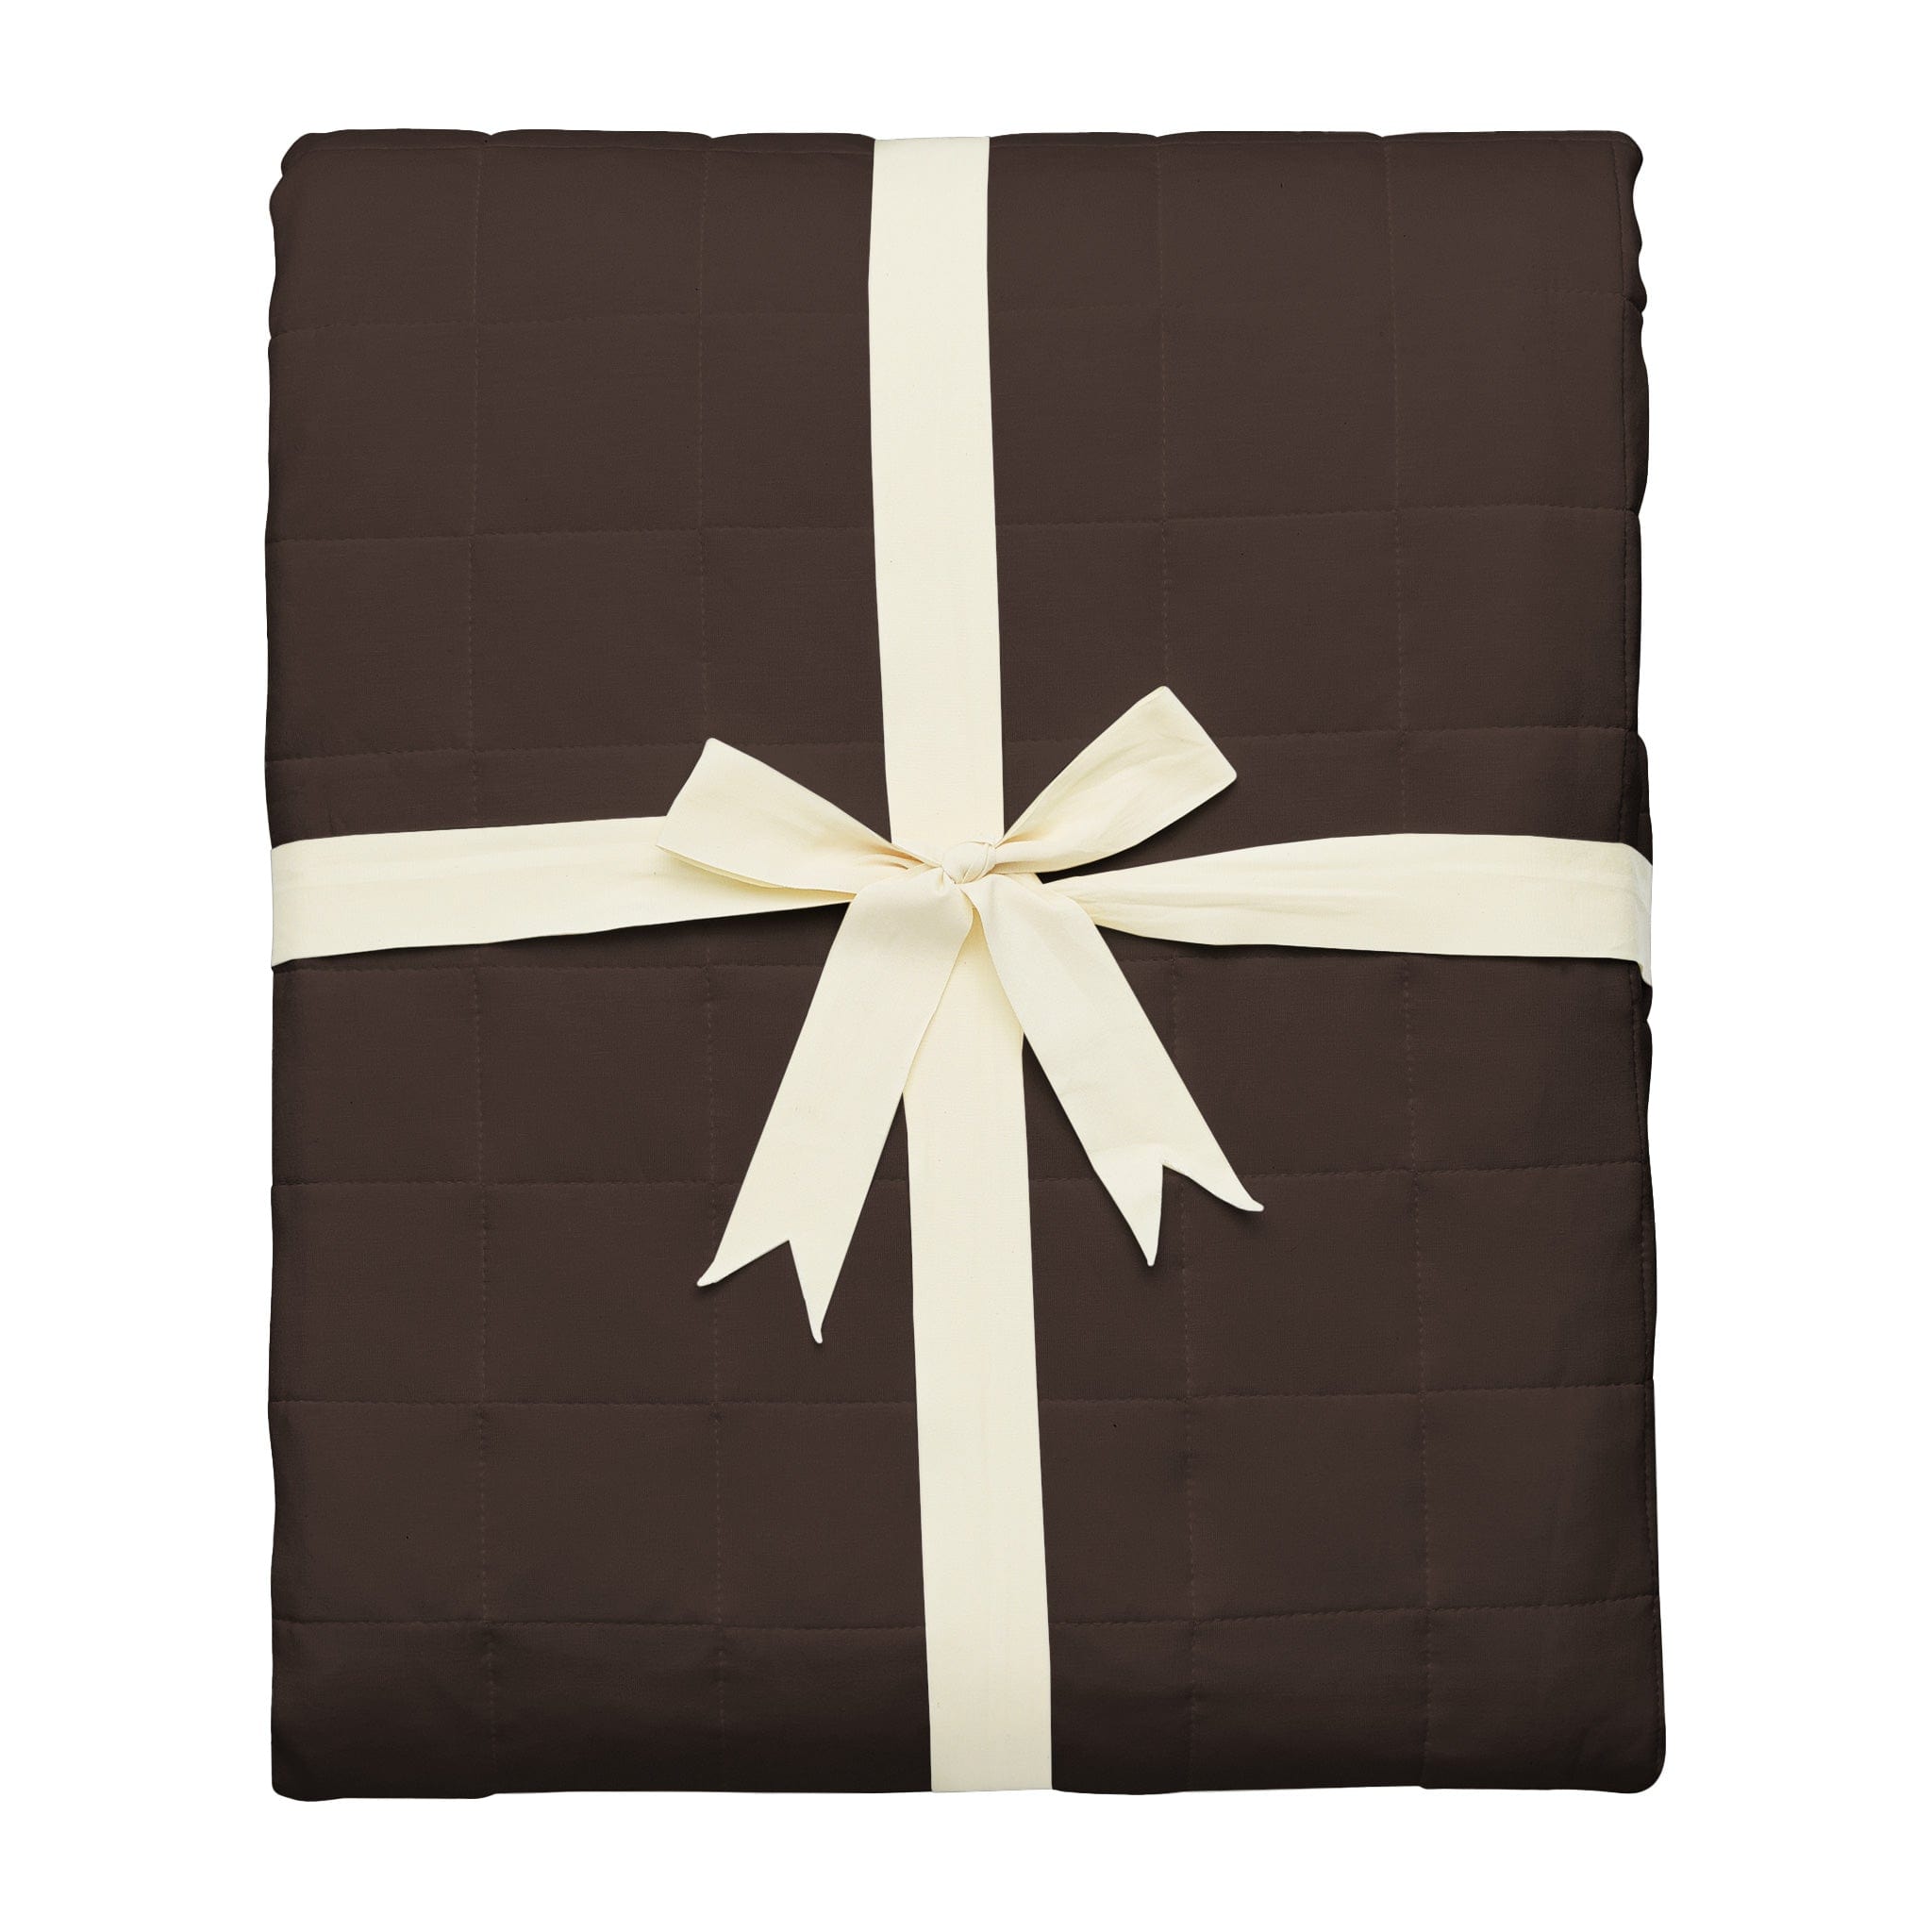 Kyte Baby Adult Blanket Espresso / Adult Adult Quilted Blanket in Espresso 2.5